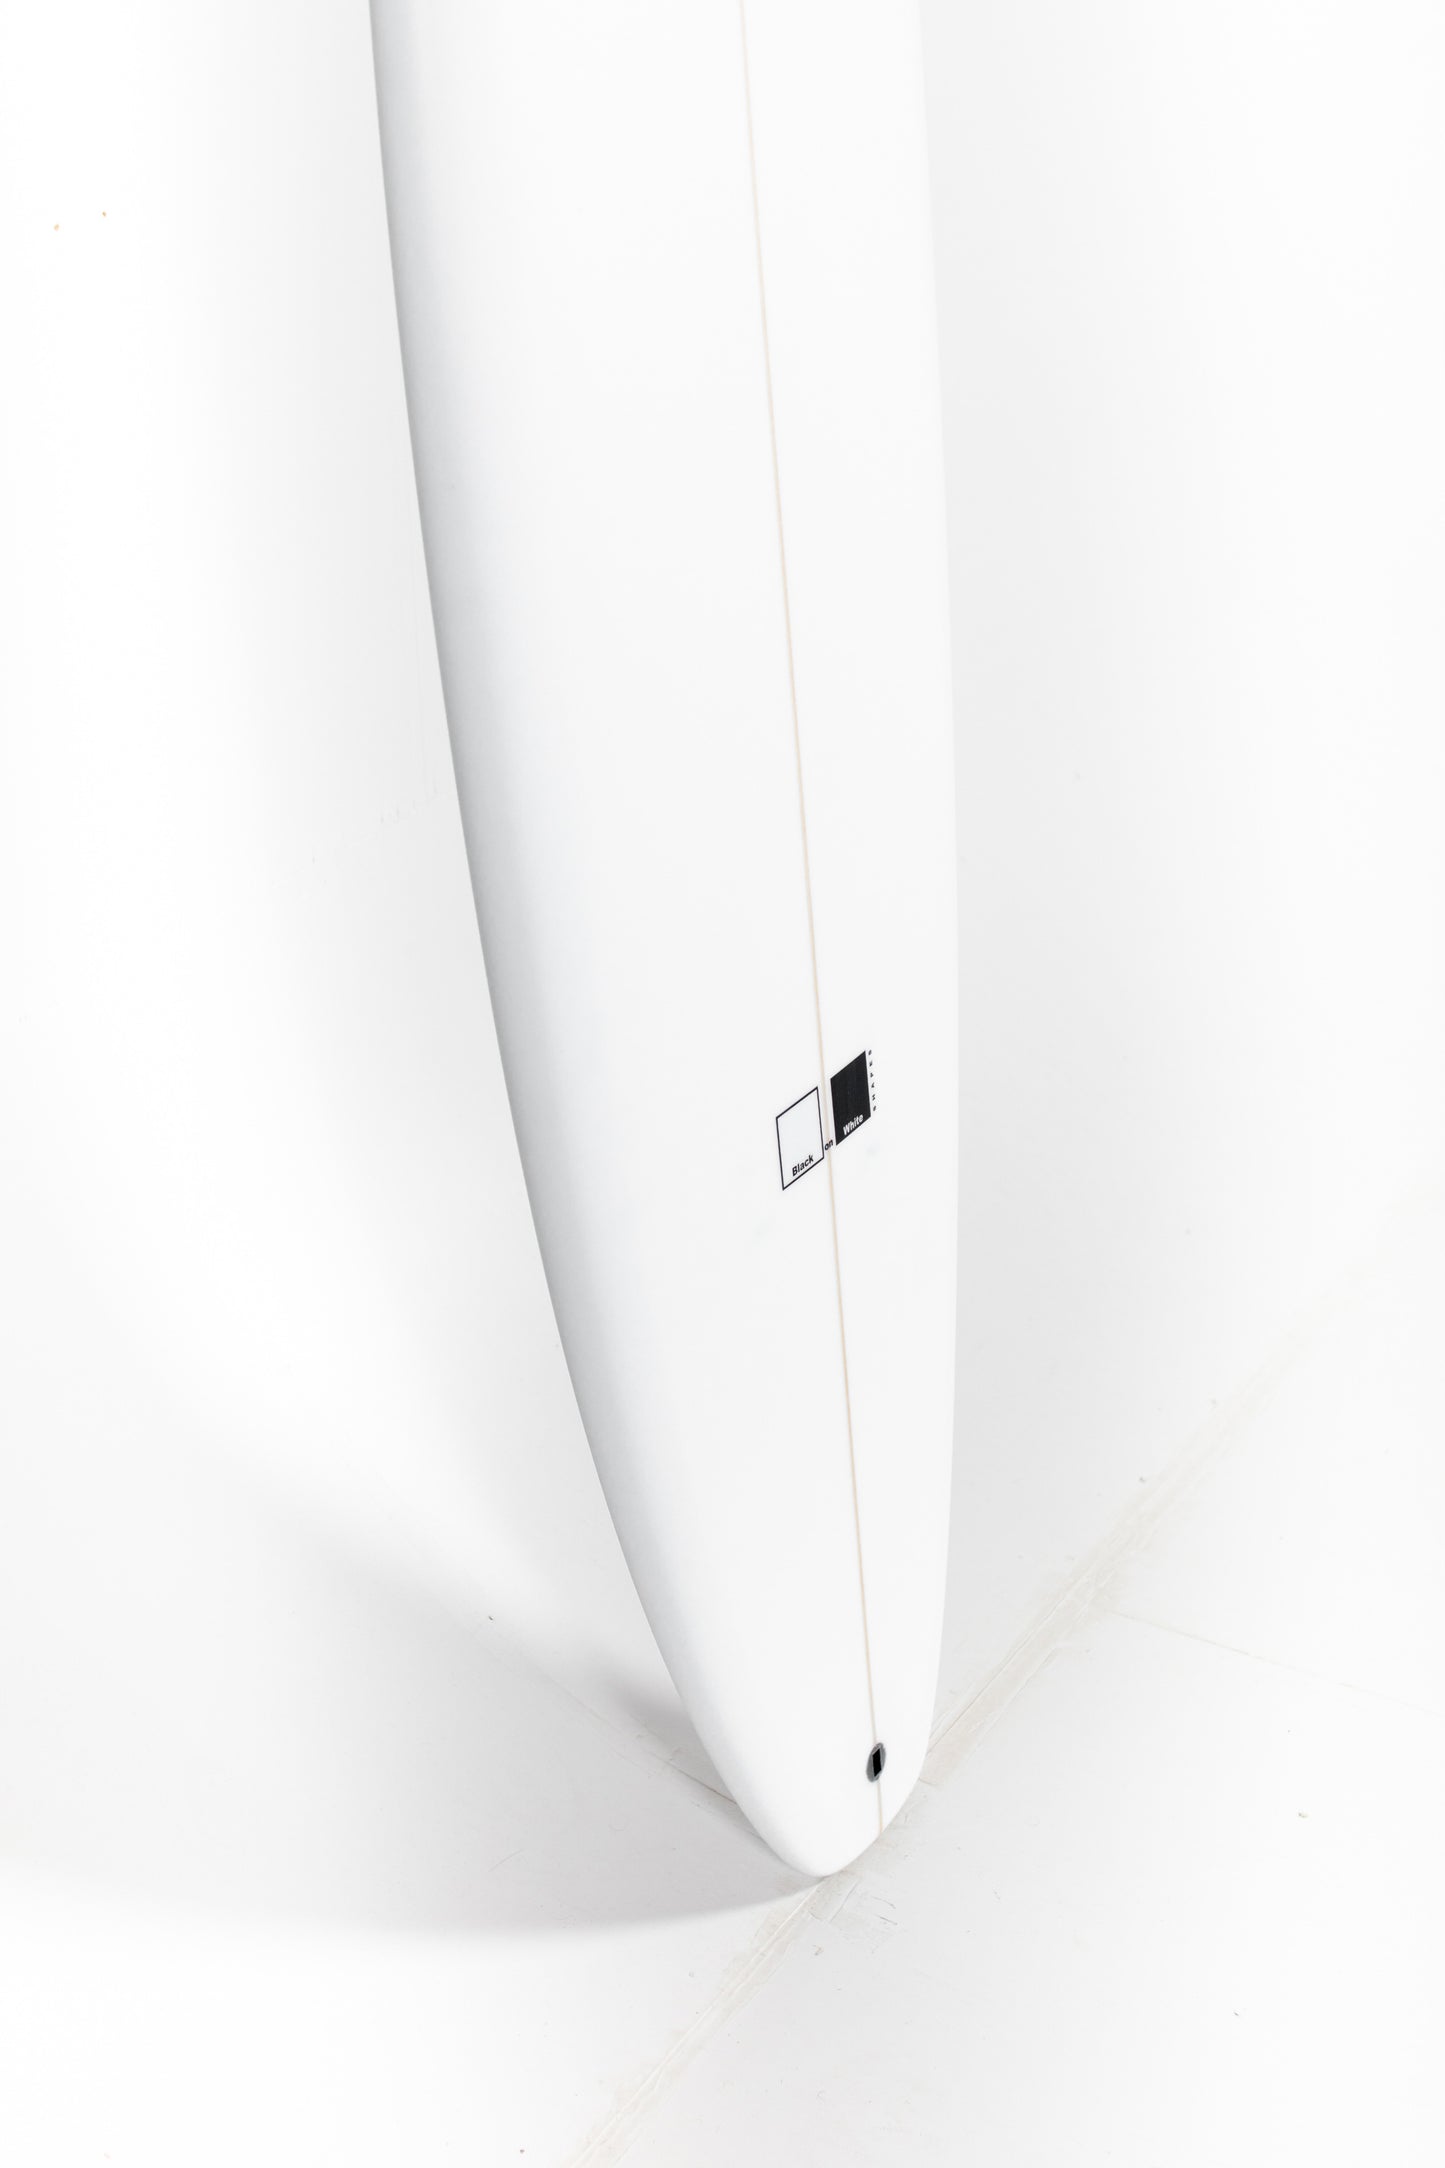 
                  
                    BW SURFBOARDS - BW SURFBOARDS Evolutivo 6'8" x 21 x 2 3/4 x 45.7L. at PUKAS SURF SHOP
                  
                